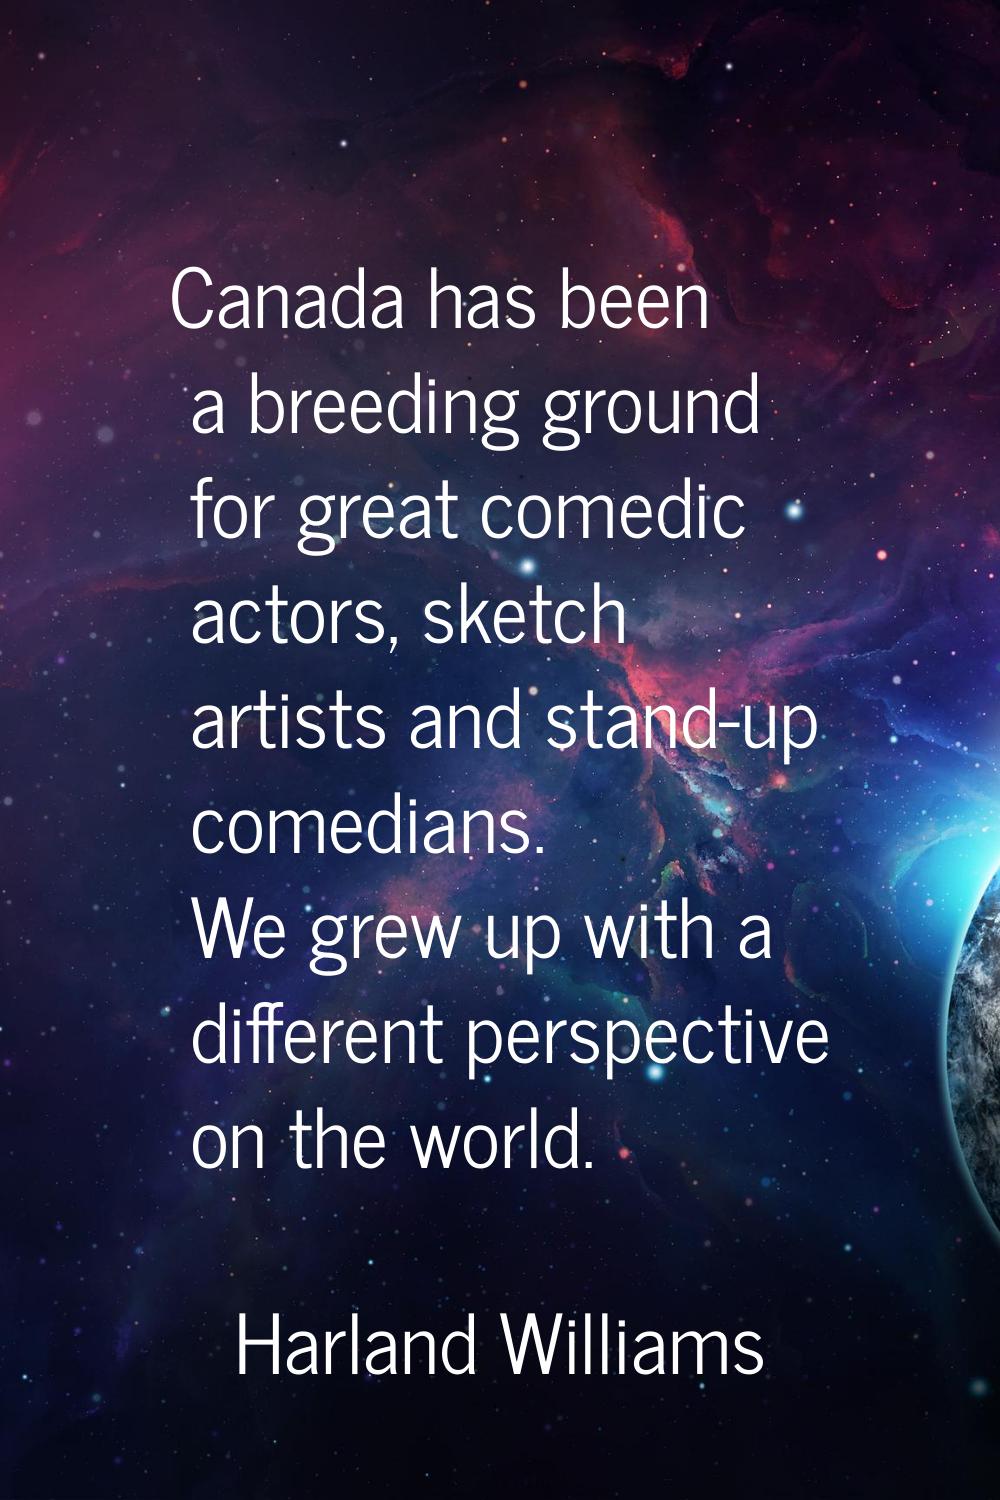 Canada has been a breeding ground for great comedic actors, sketch artists and stand-up comedians. 